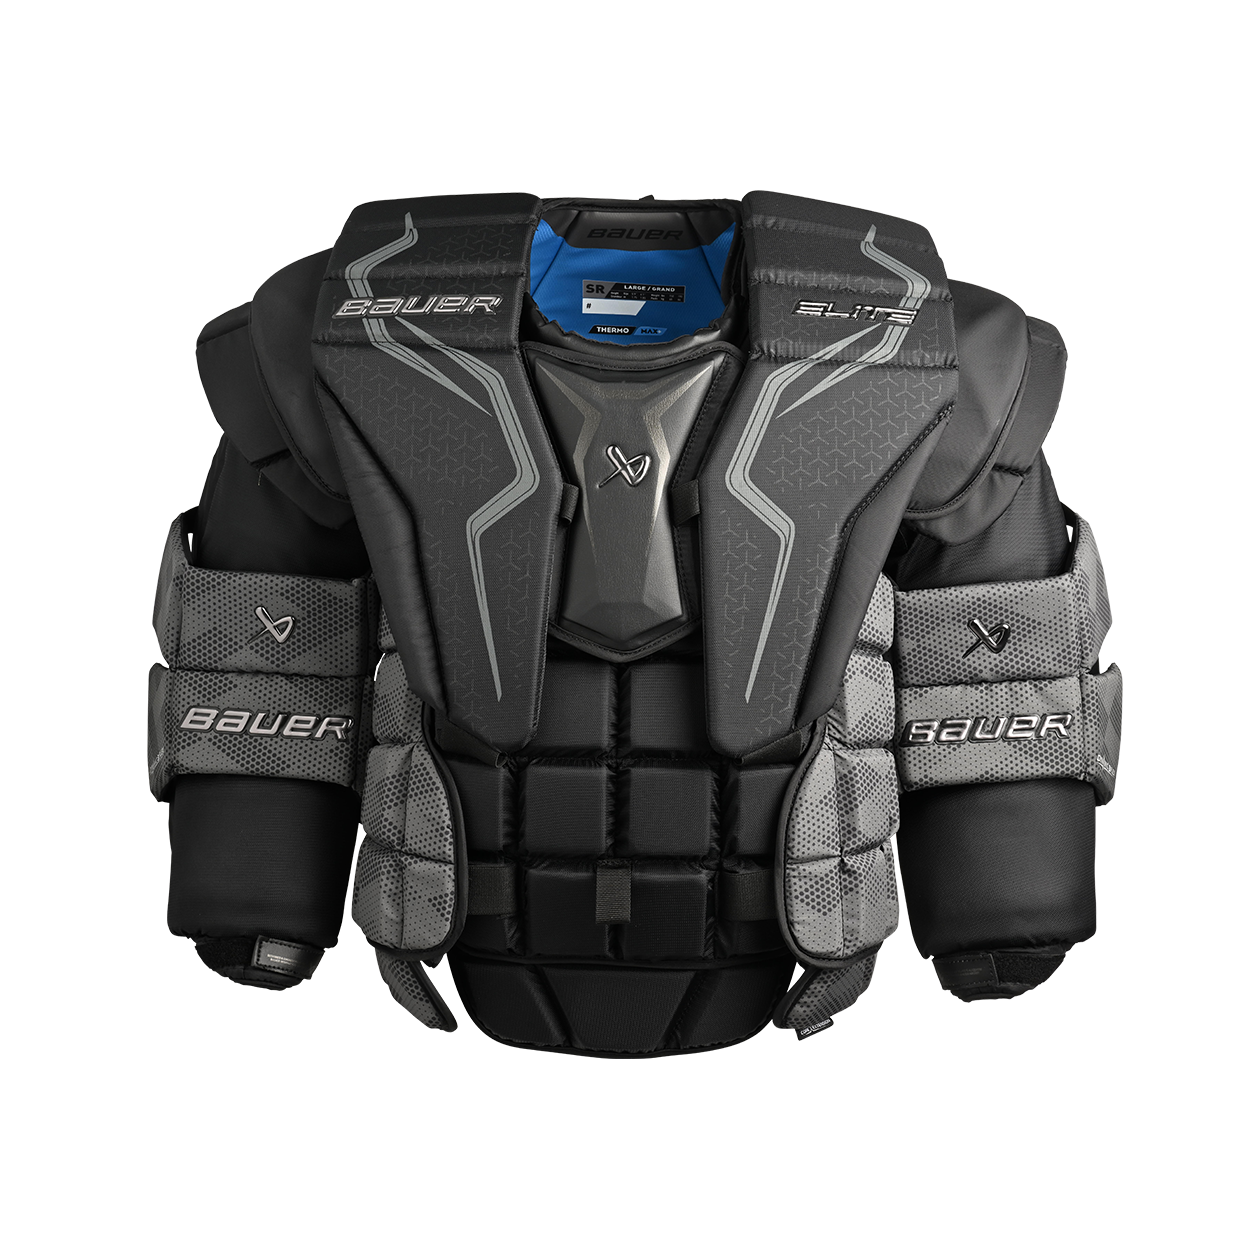 PBT Extended Chest Protector, Womens